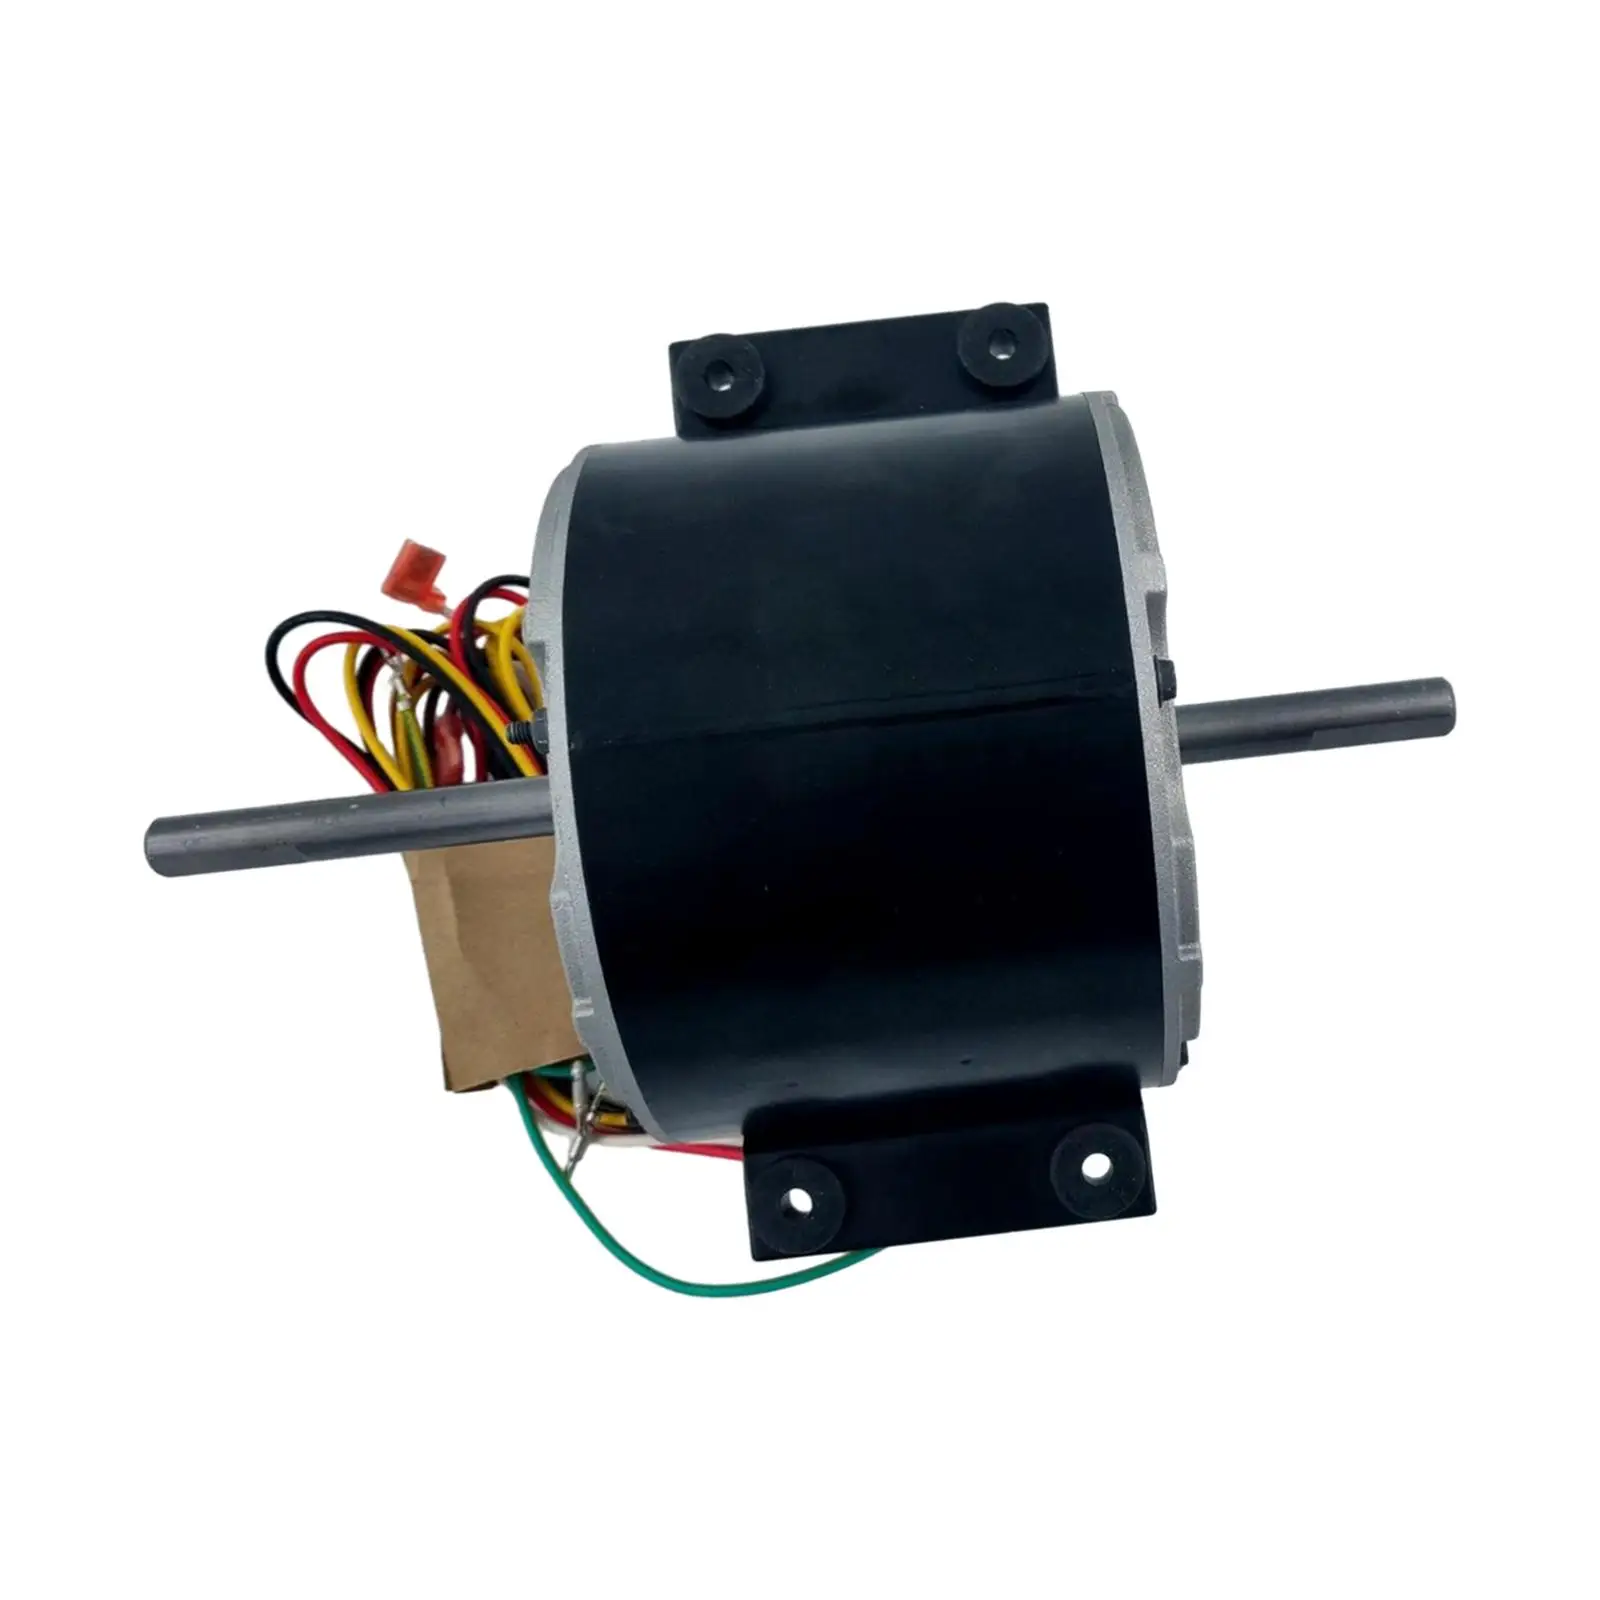 Condenser Fan Motor 3315332.005 3 Speed Aluminum Alloy Replace for Brisk Air II